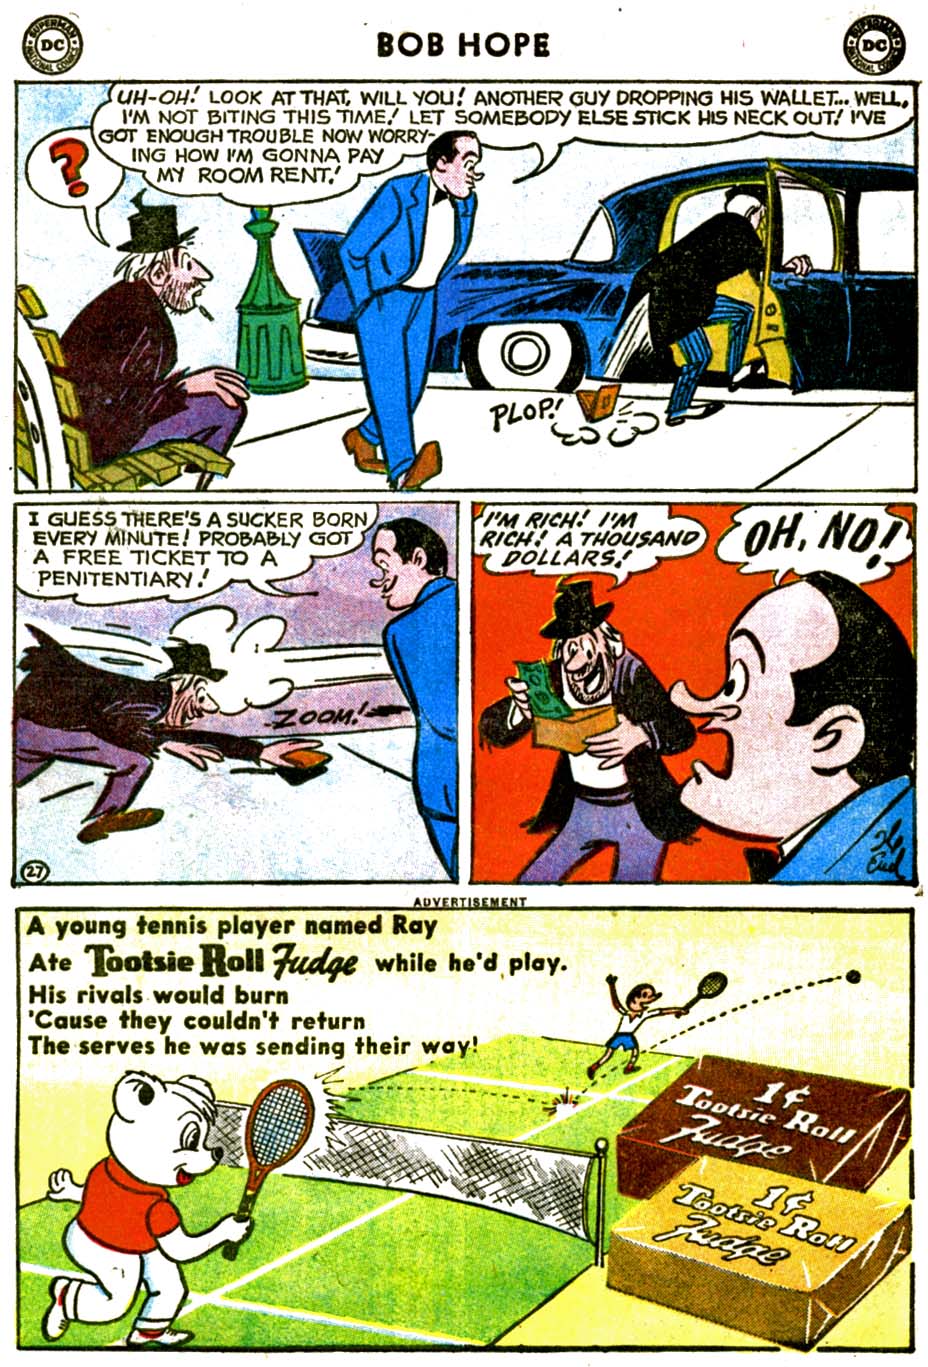 Read online The Adventures of Bob Hope comic -  Issue #58 - 32